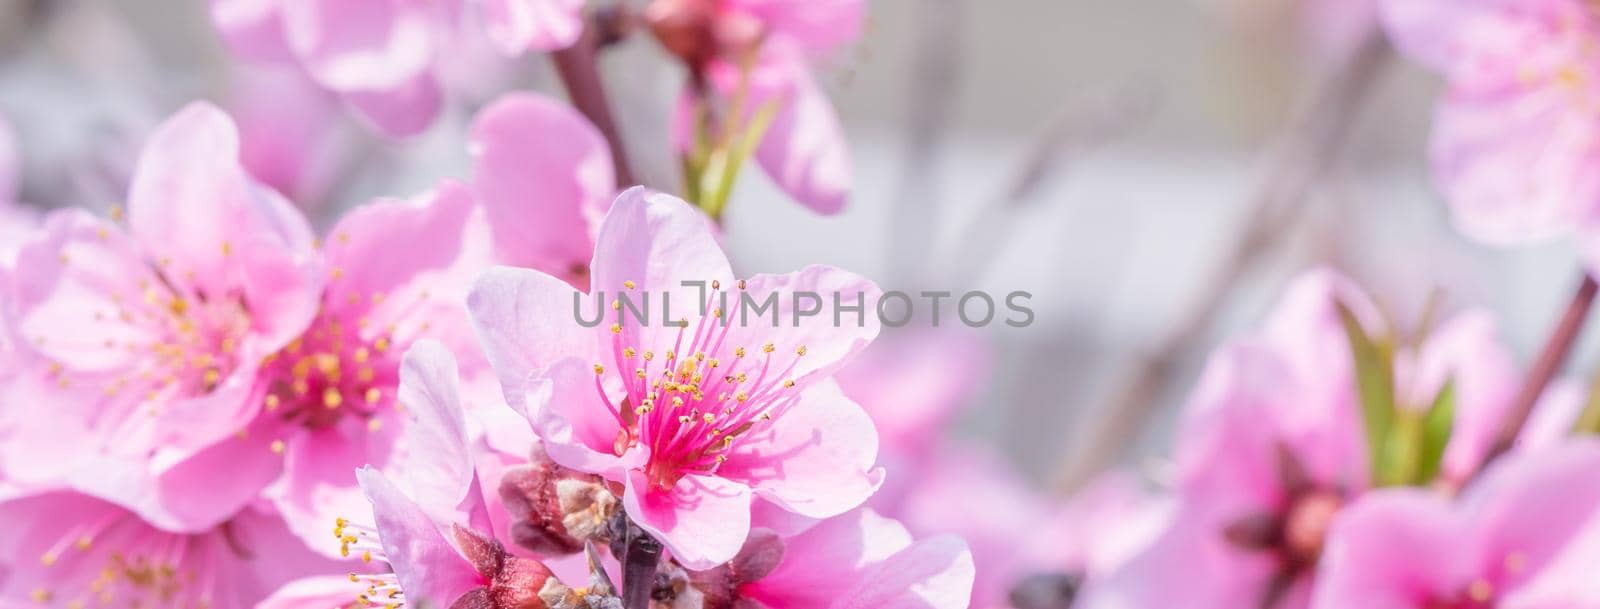 Beautiful and elegant pale light pink peach blossom flower on the tree branch at a public park garden in Spring, Japan. Blurred background. by ROMIXIMAGE